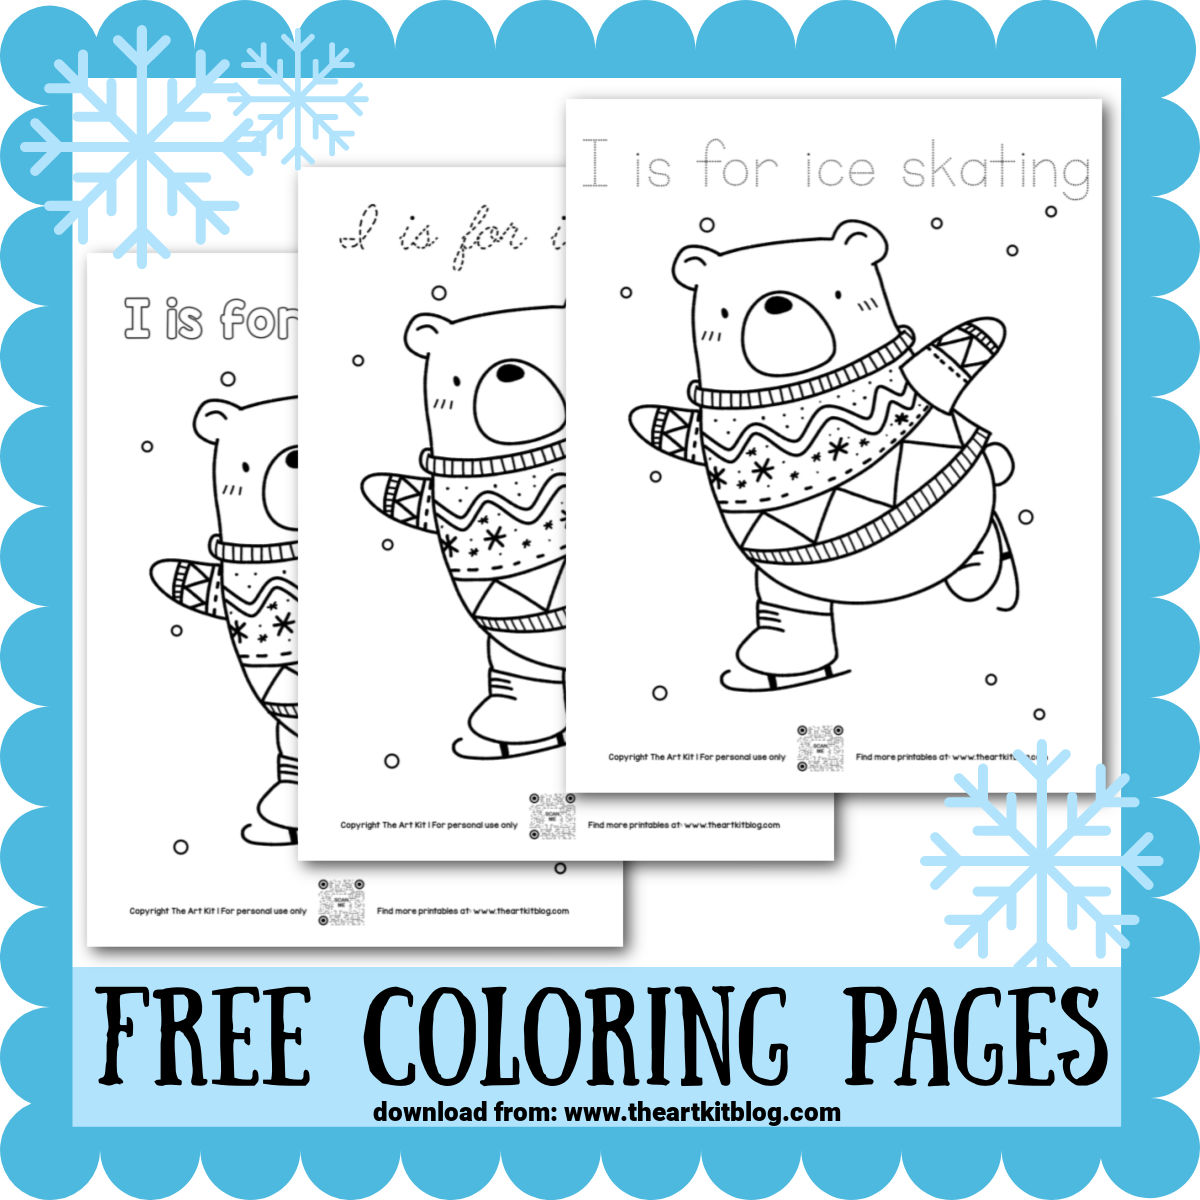 I is for ice skating free coloring pages â the art kit